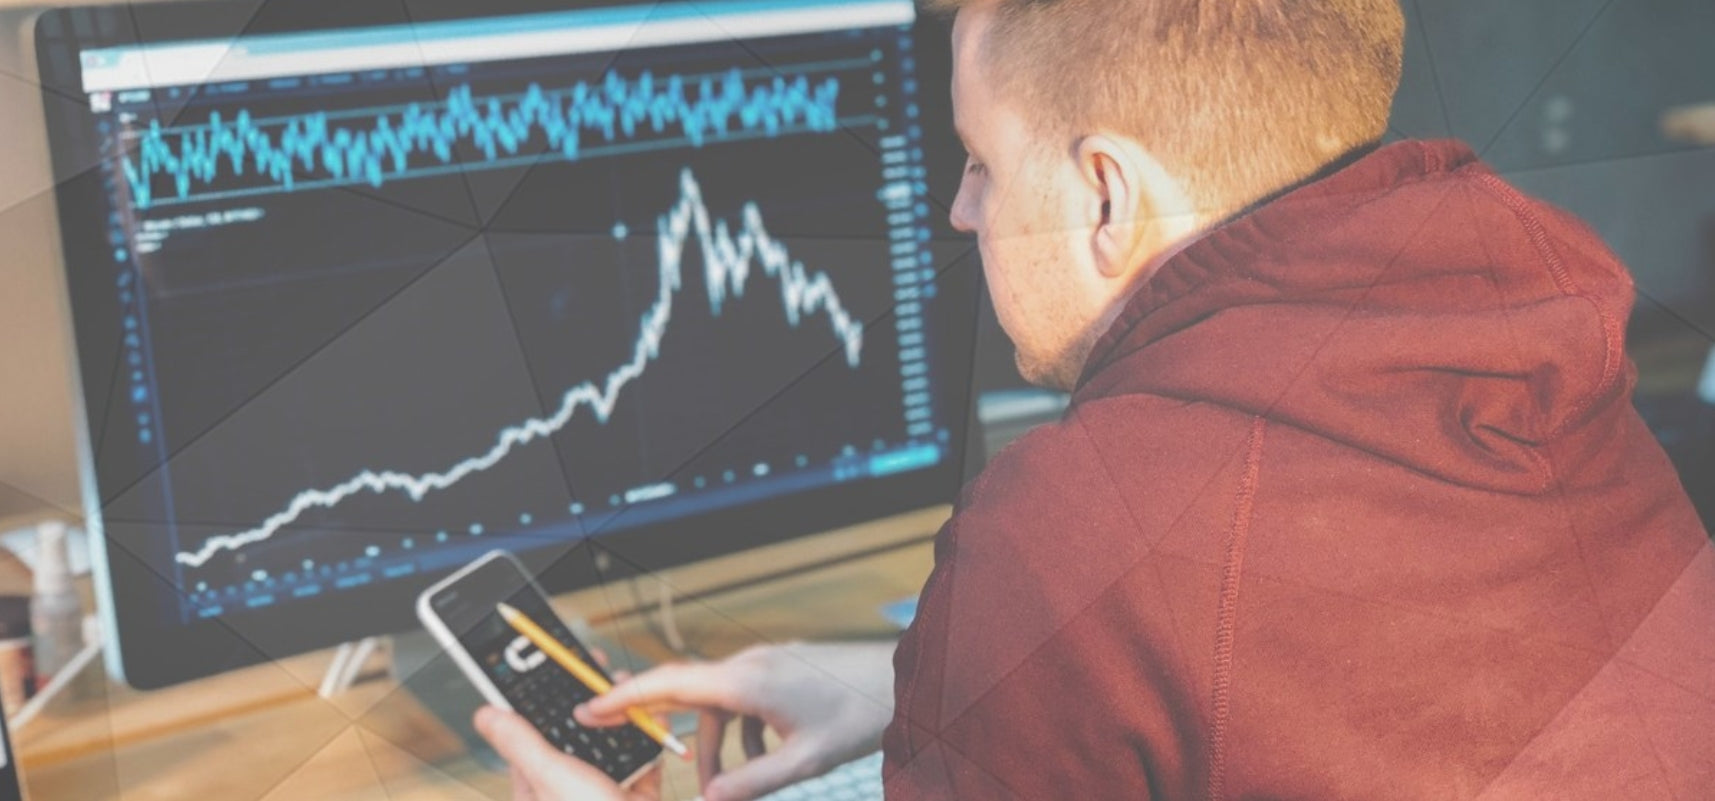 7 Day Trading Styles and Techniques of the FX Market